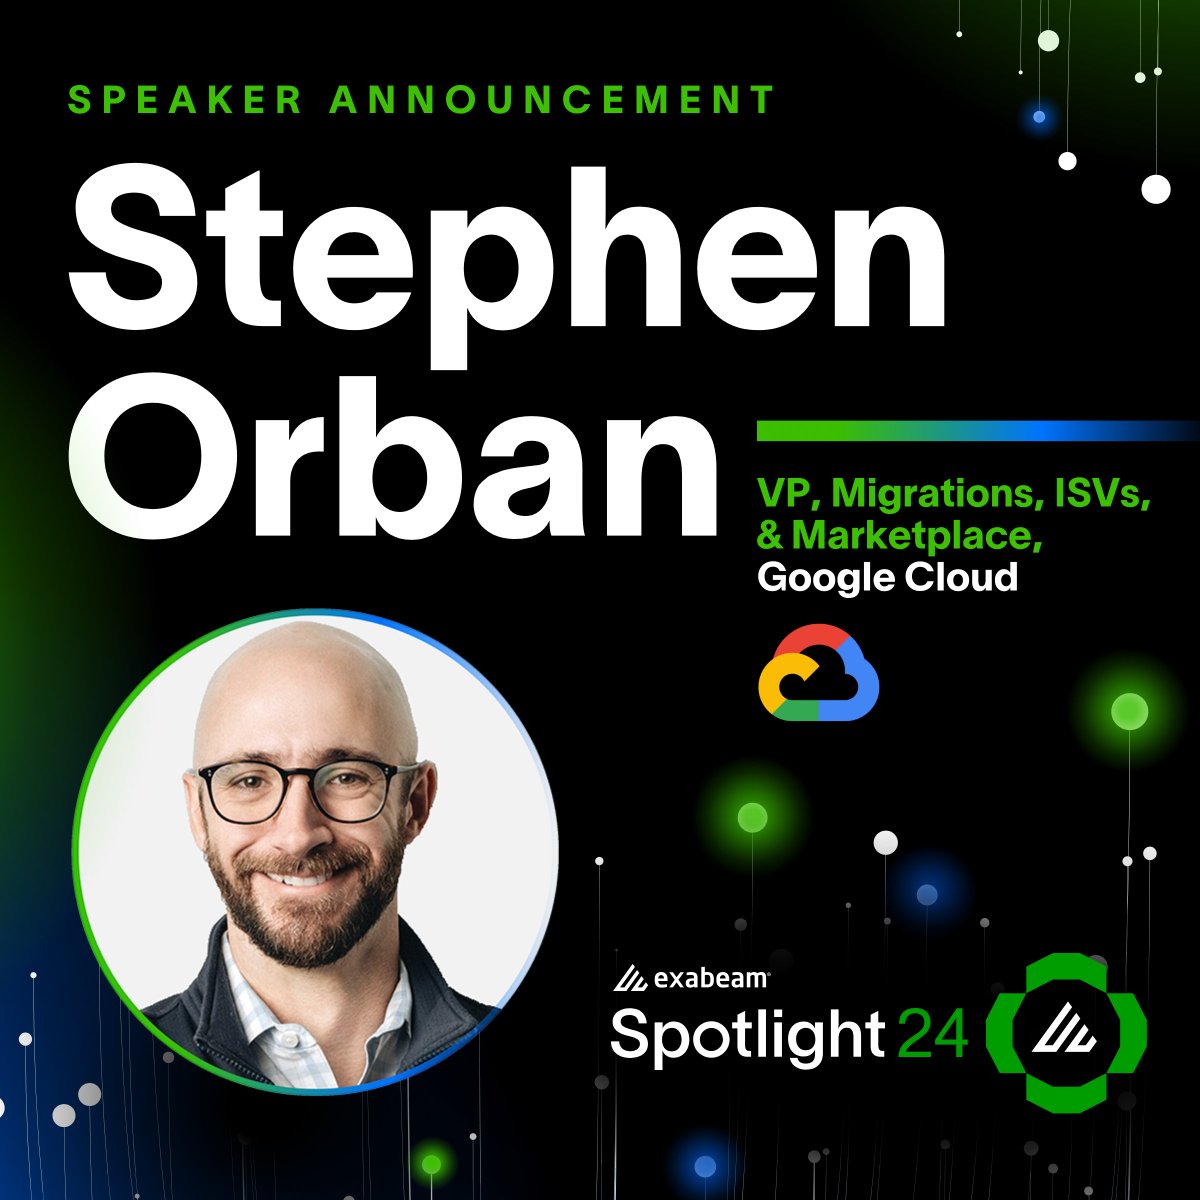 Join us for the Spotlight24 global webcast as @googlecloud's @stephenorban takes us through his views of #AI adoption by top organizations and what key strategies security ops teams need to think about: bit.ly/48QVzht #GCP #Spotlight24 #cybersecurity #TDIR